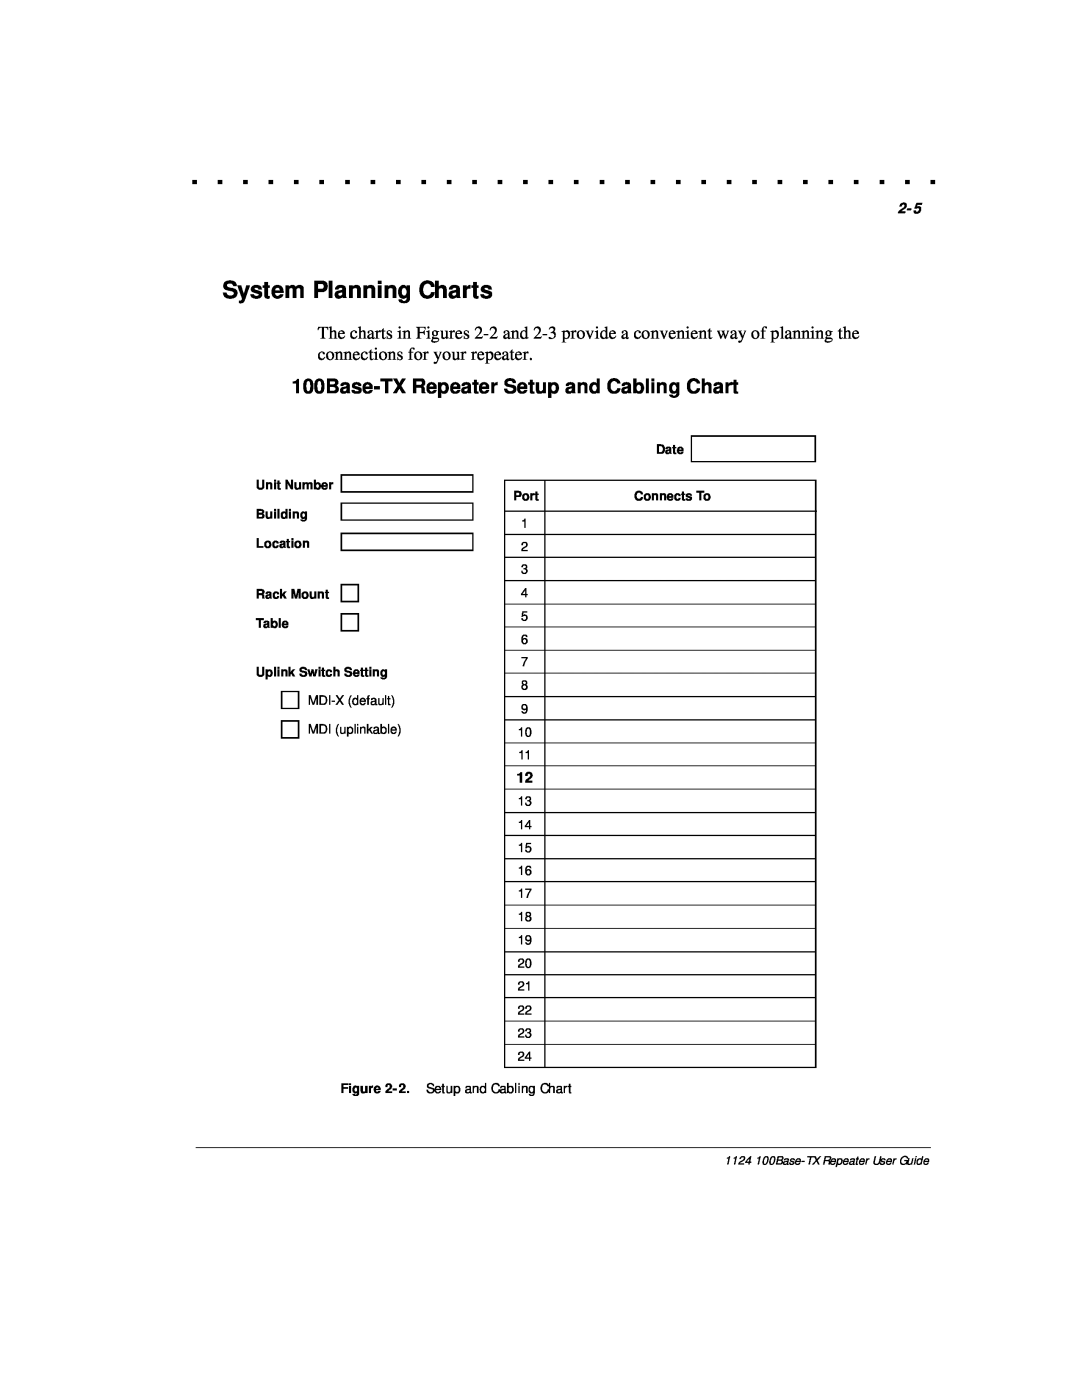 Compaq System Planning Charts, 100Base-TX Repeater Setup and Cabling Chart, 1124 100Base-TX Repeater User Guide, Date 